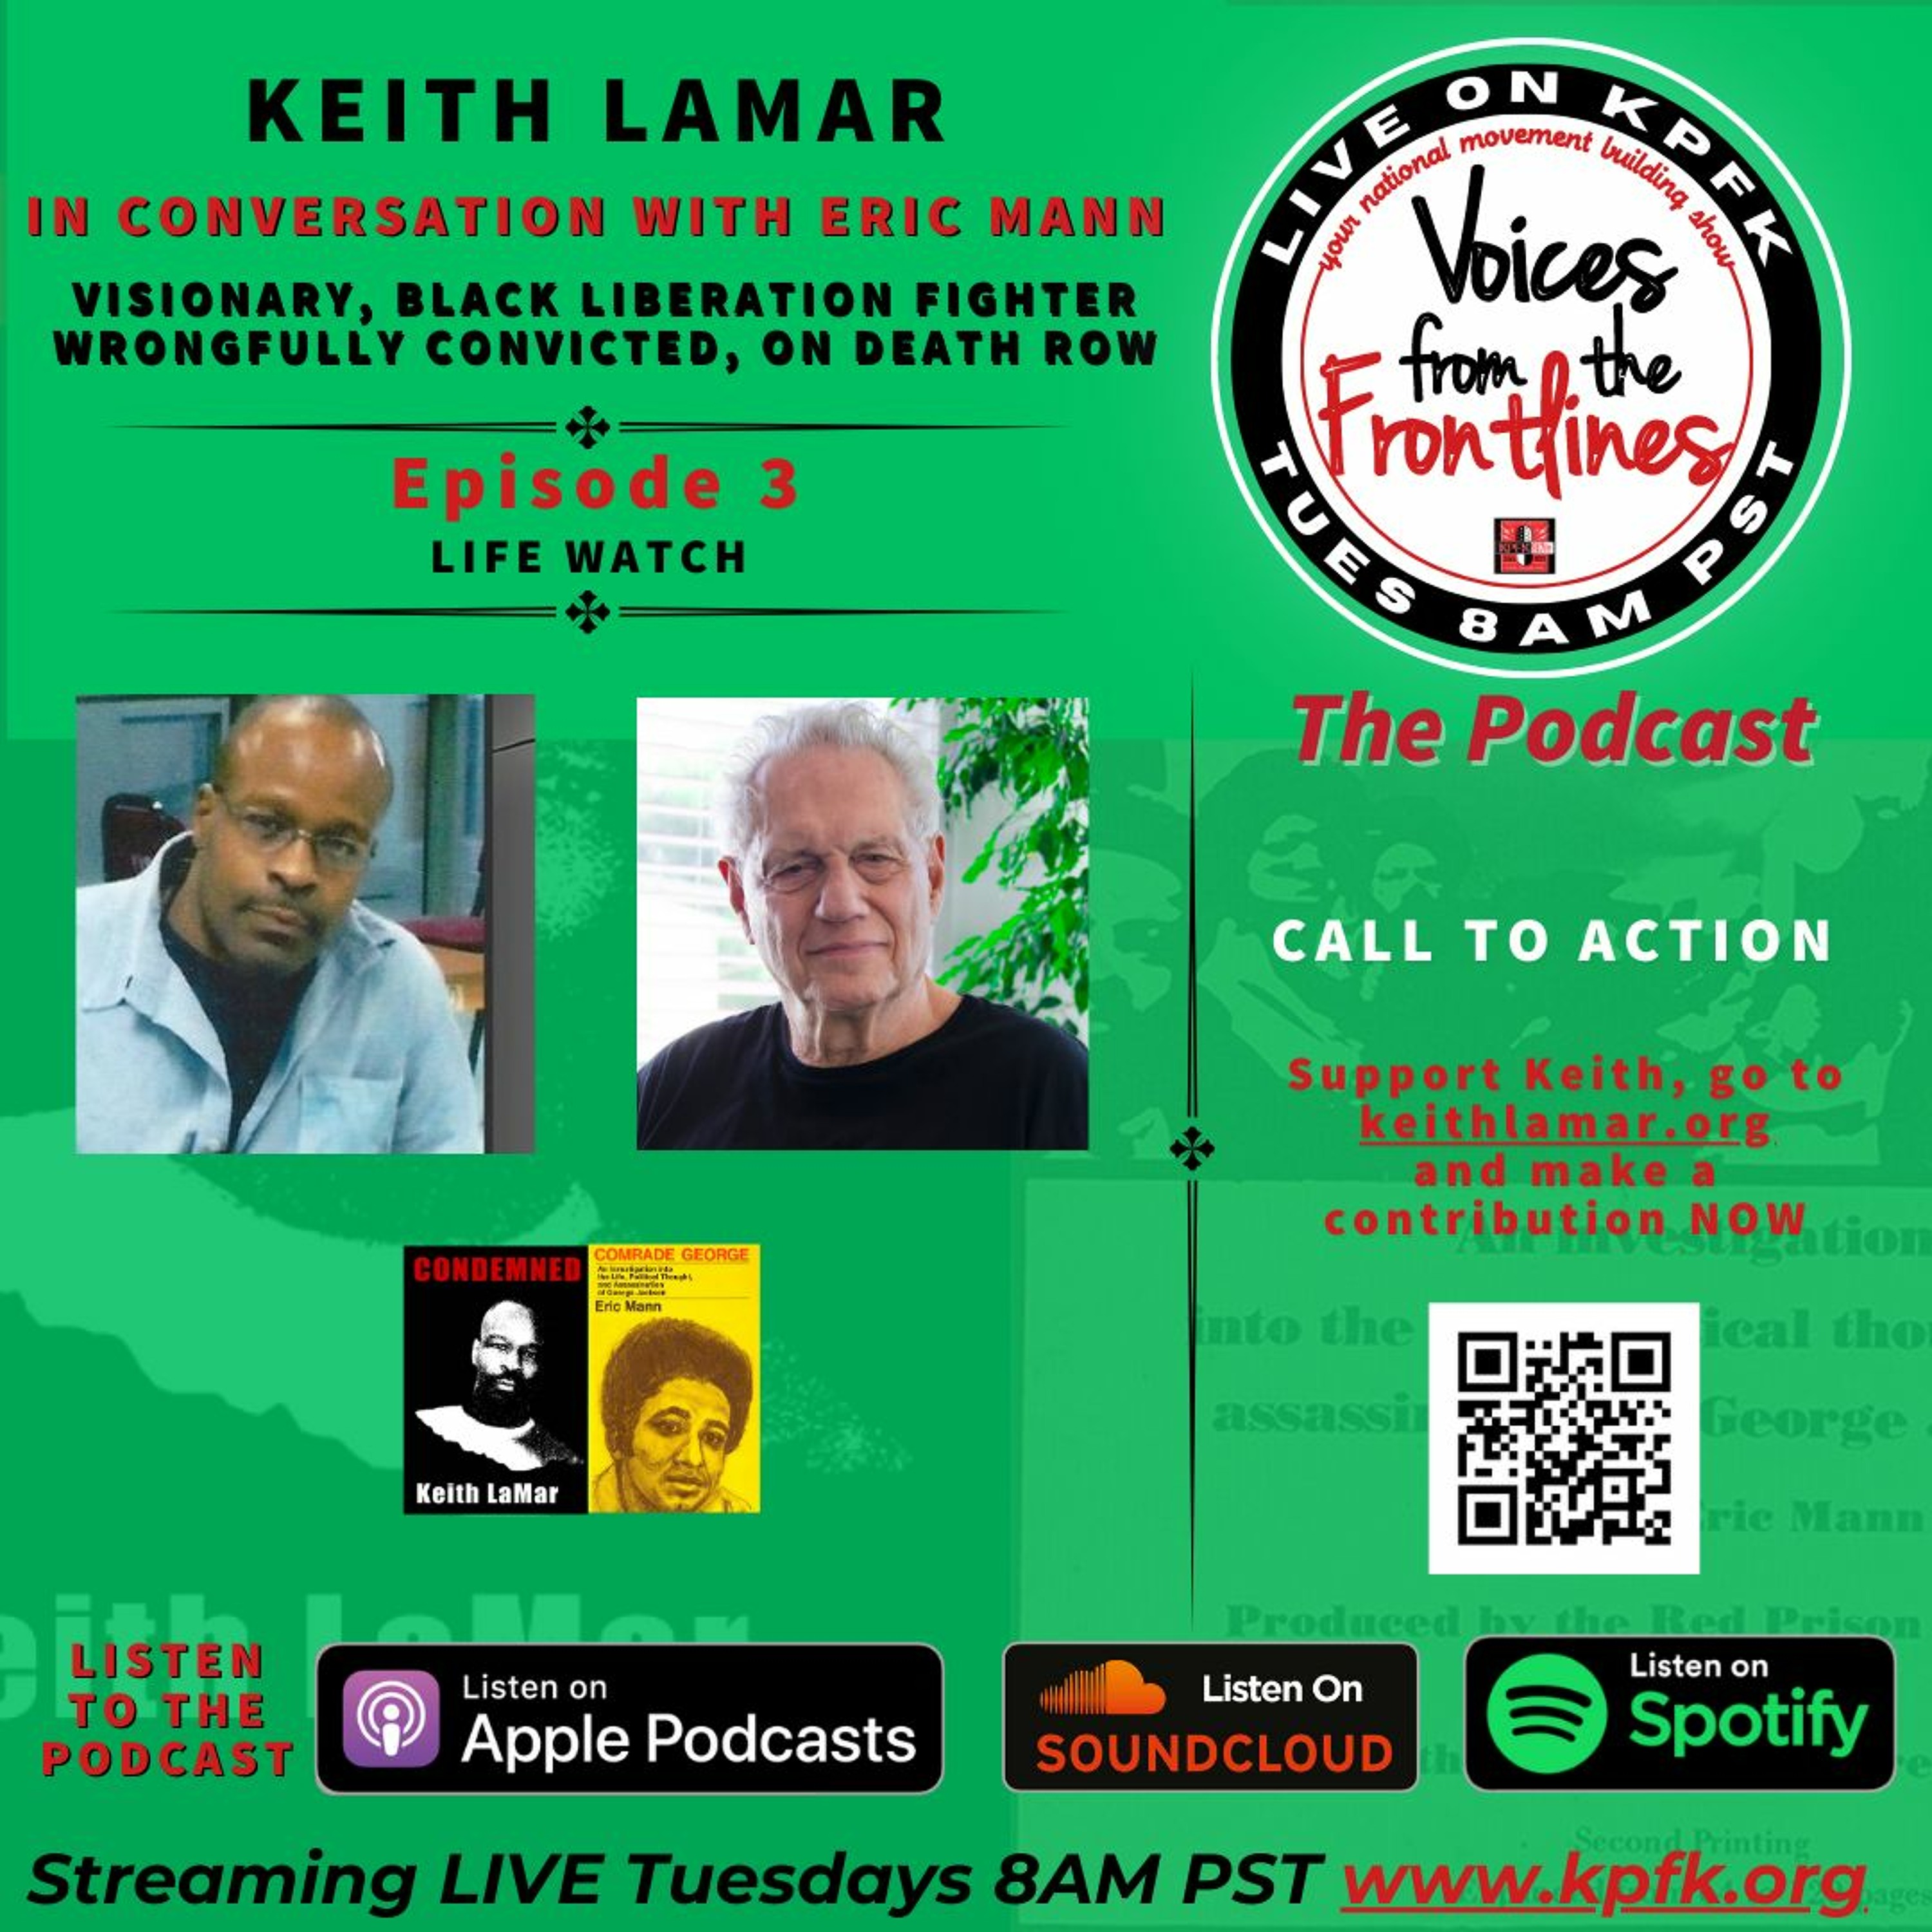 VOICES FROM THE FRONTLINES: FEATURES KEITH LAMAR; Episode 3